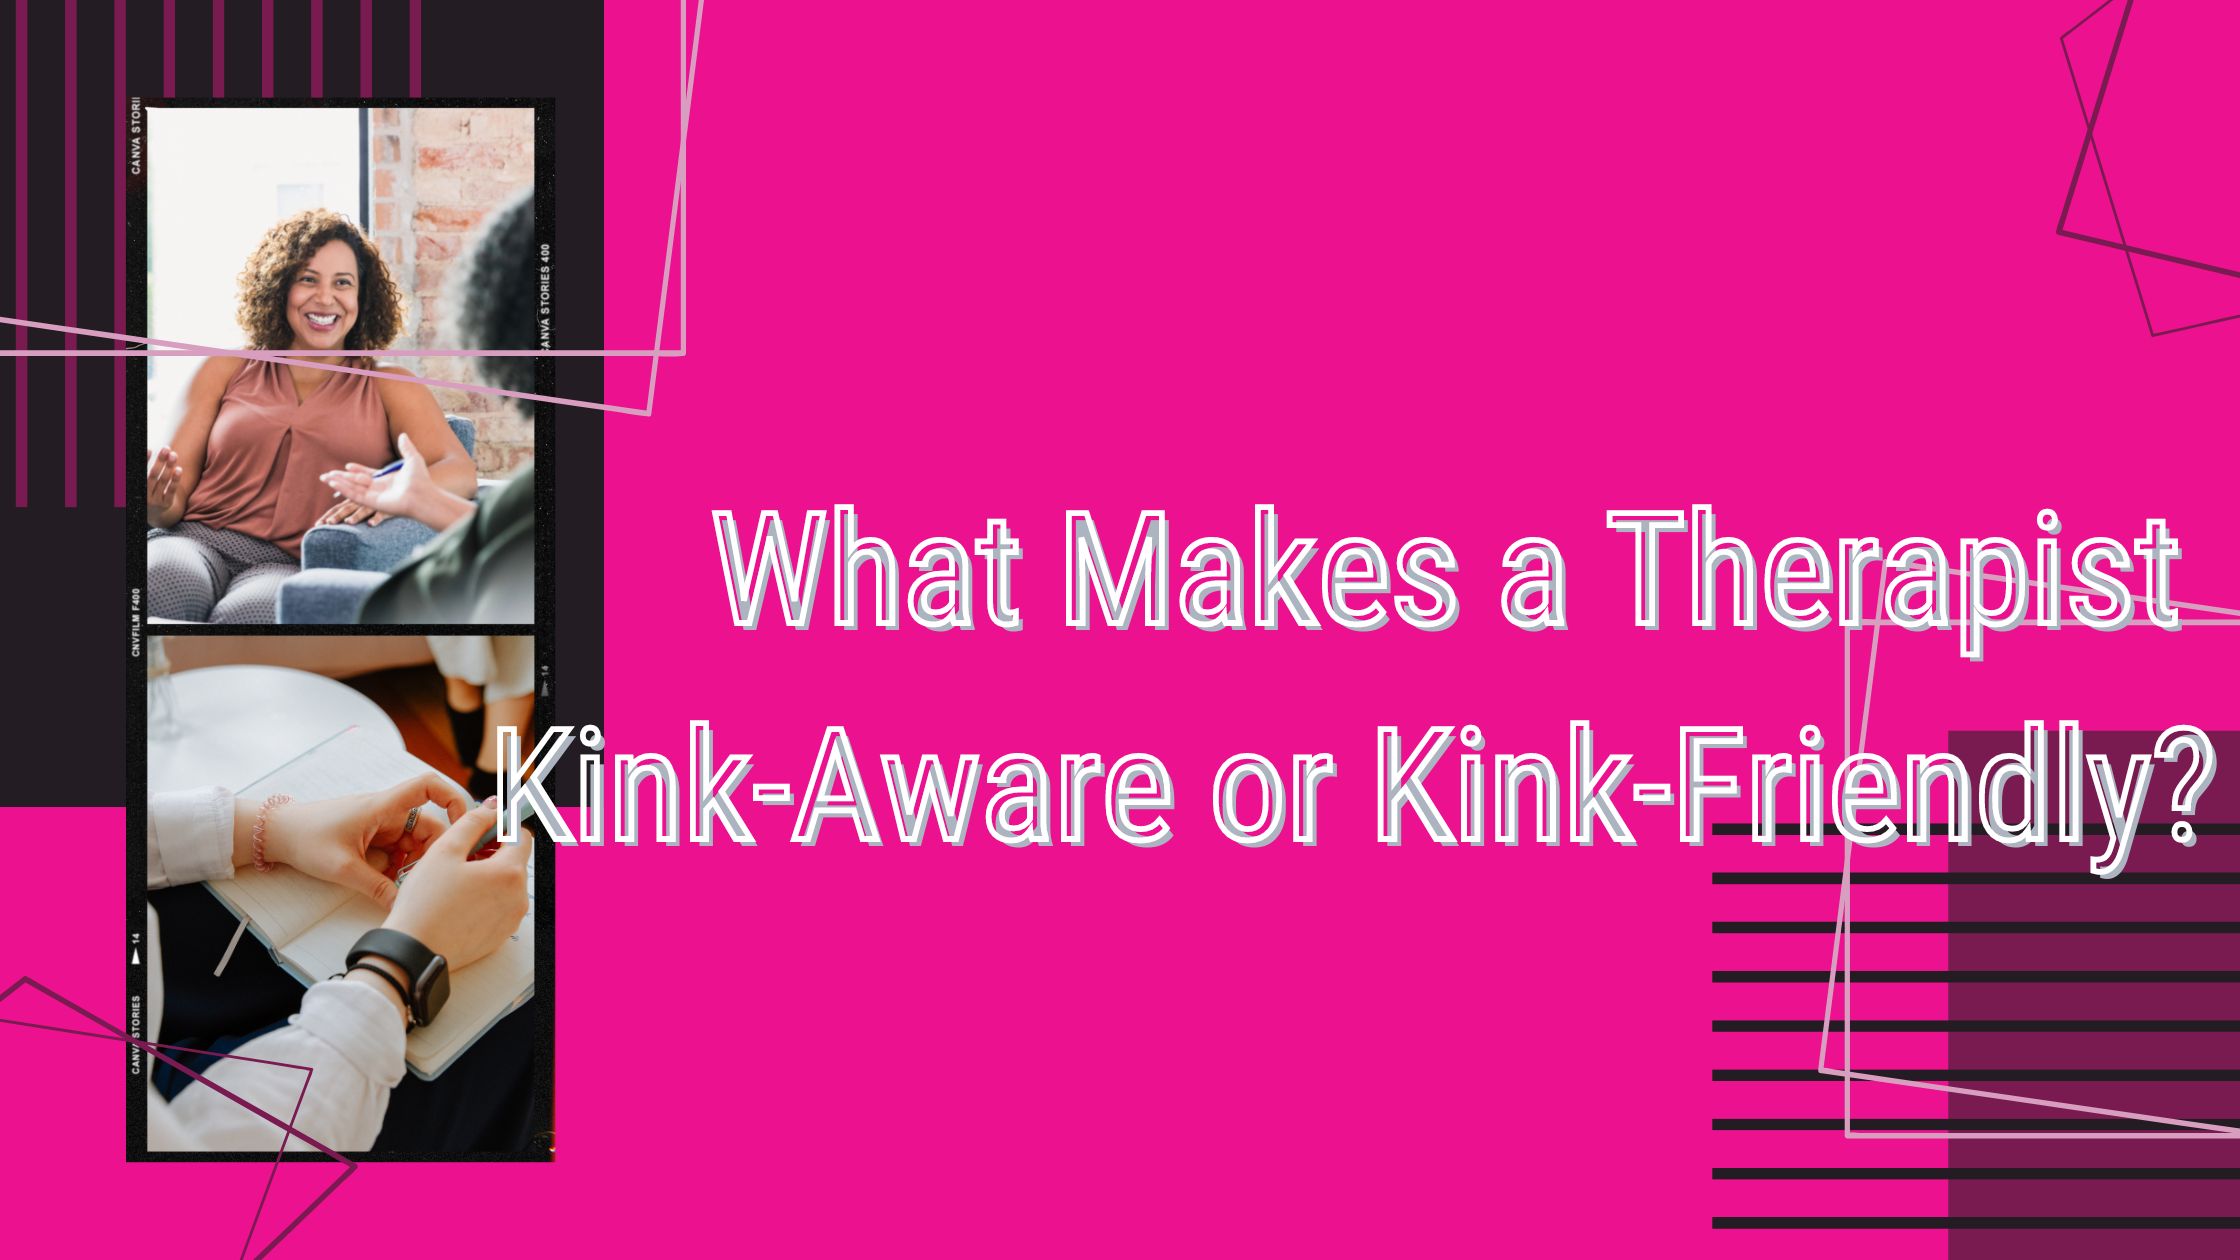 What Makes a Therapist Kink-Aware or Kink-Friendly?